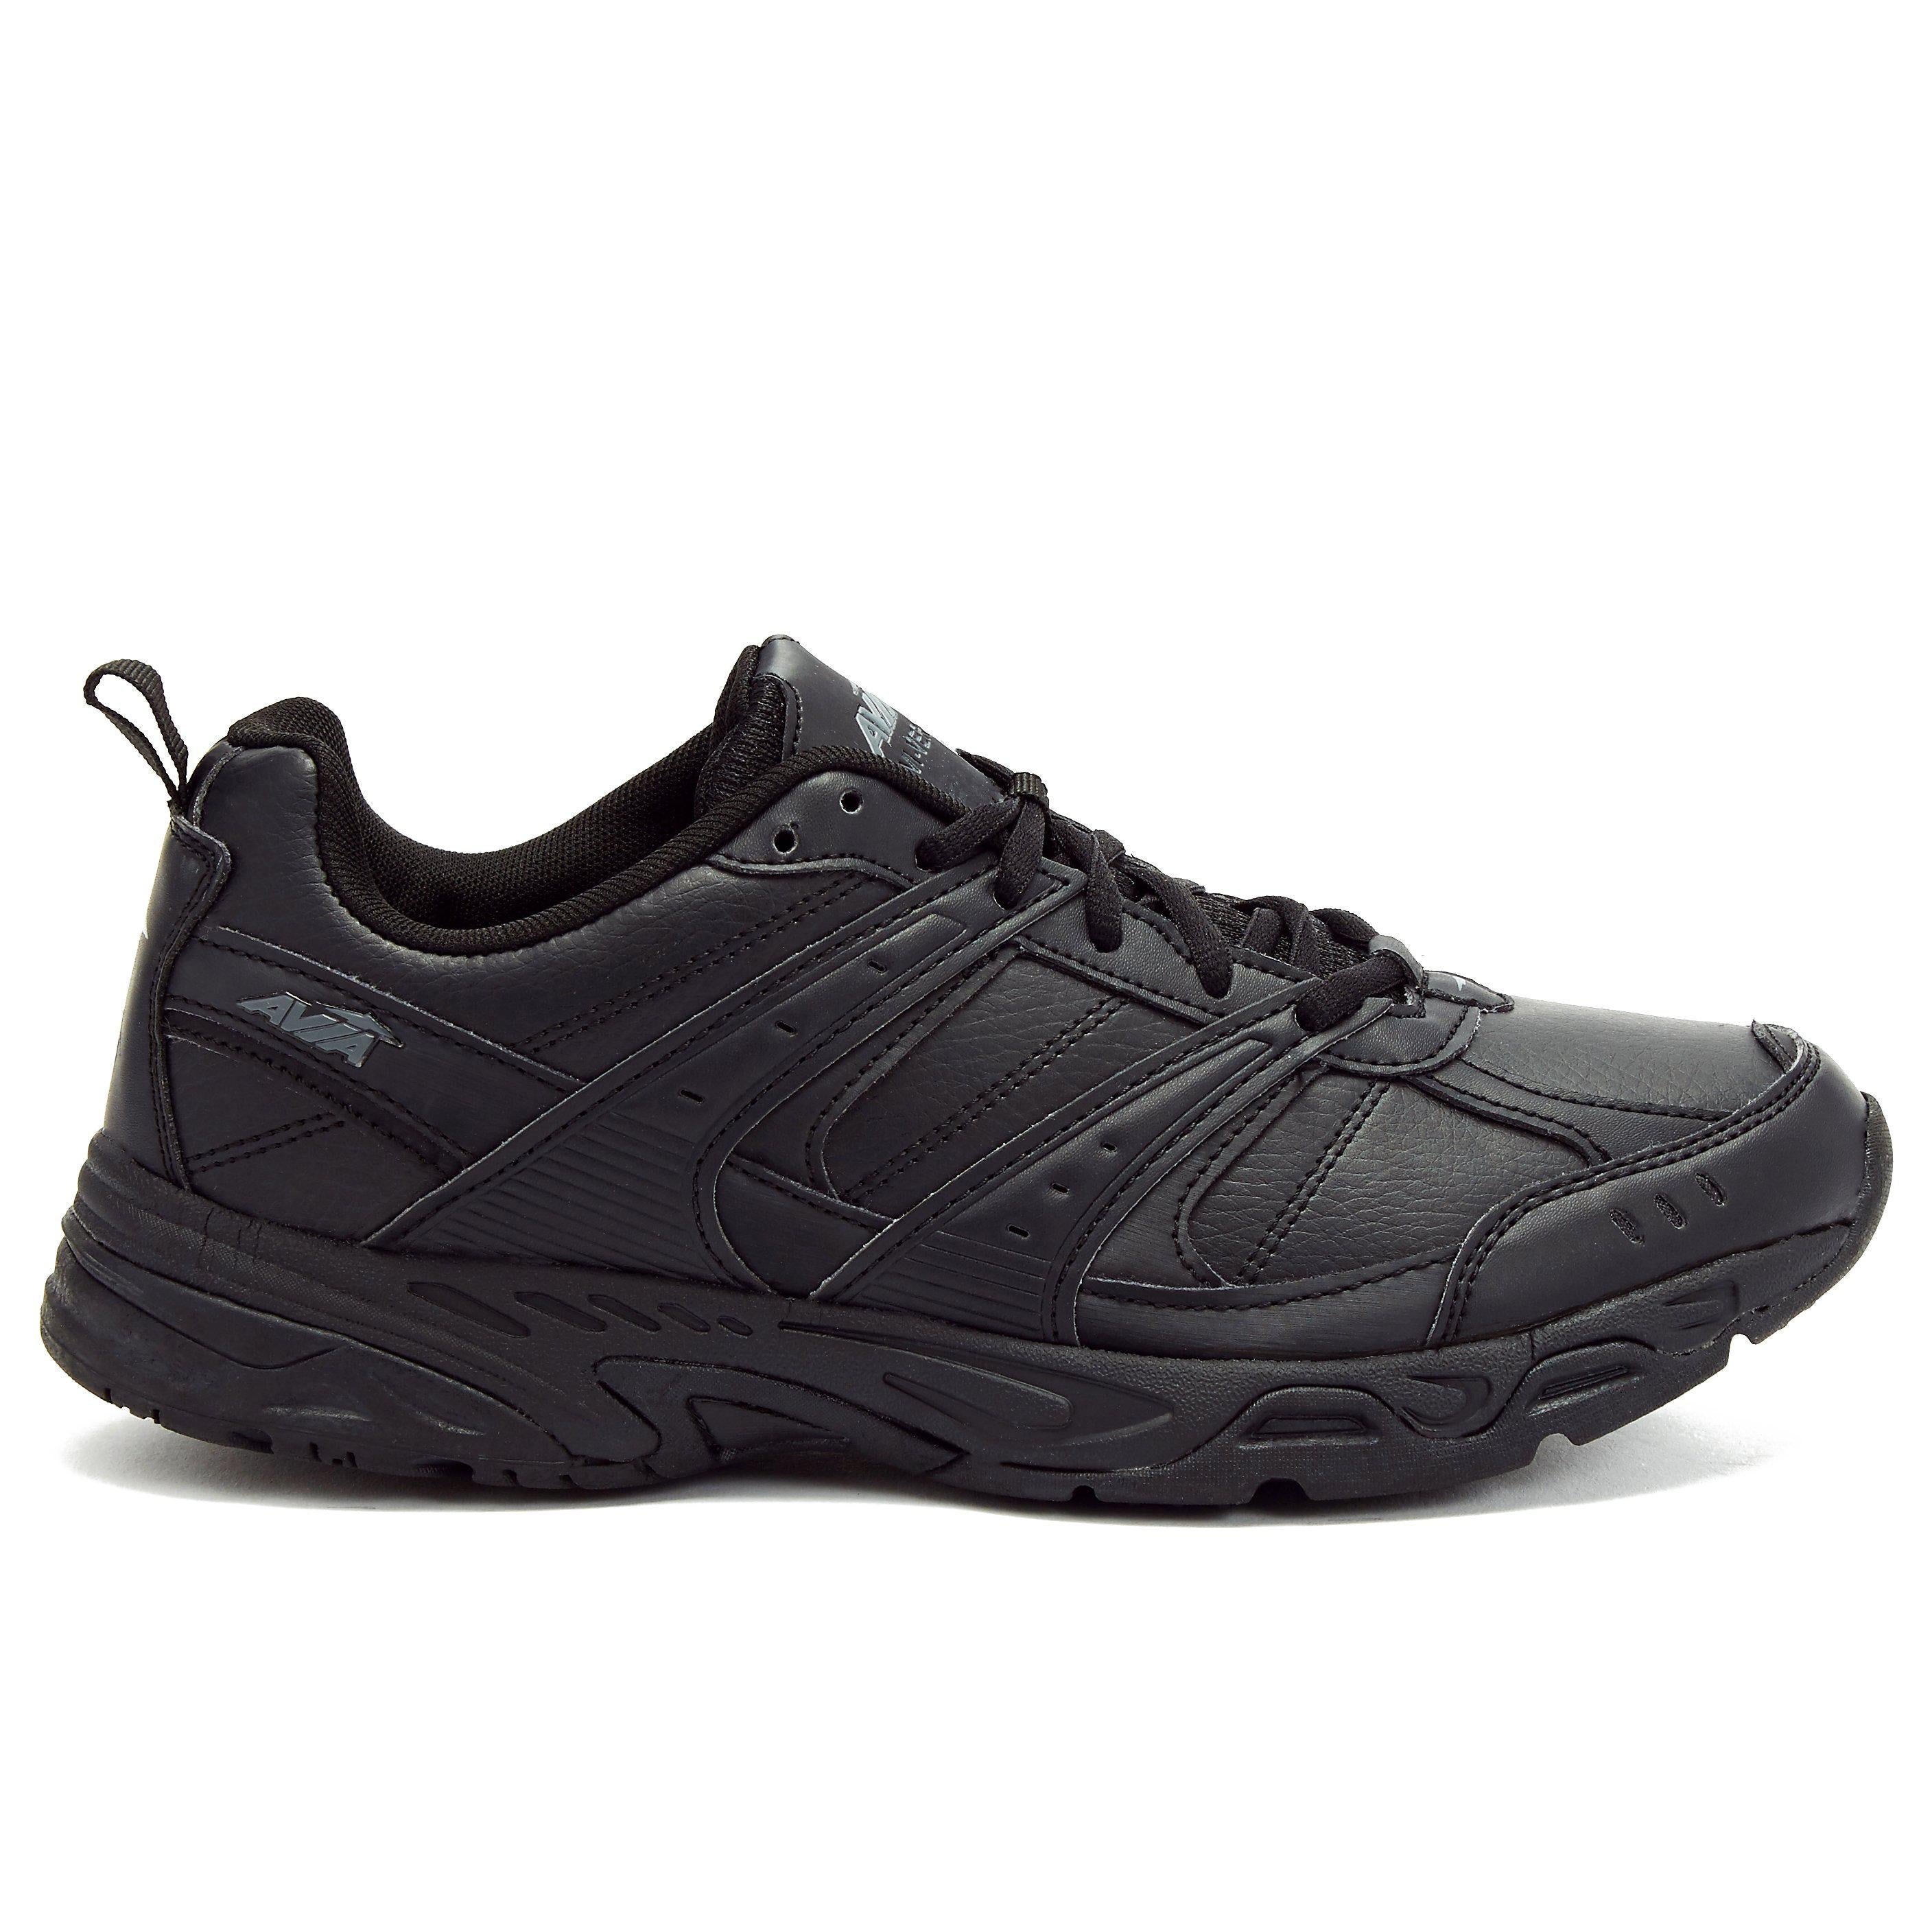 Jet black lace up Avia training sneakers for men 